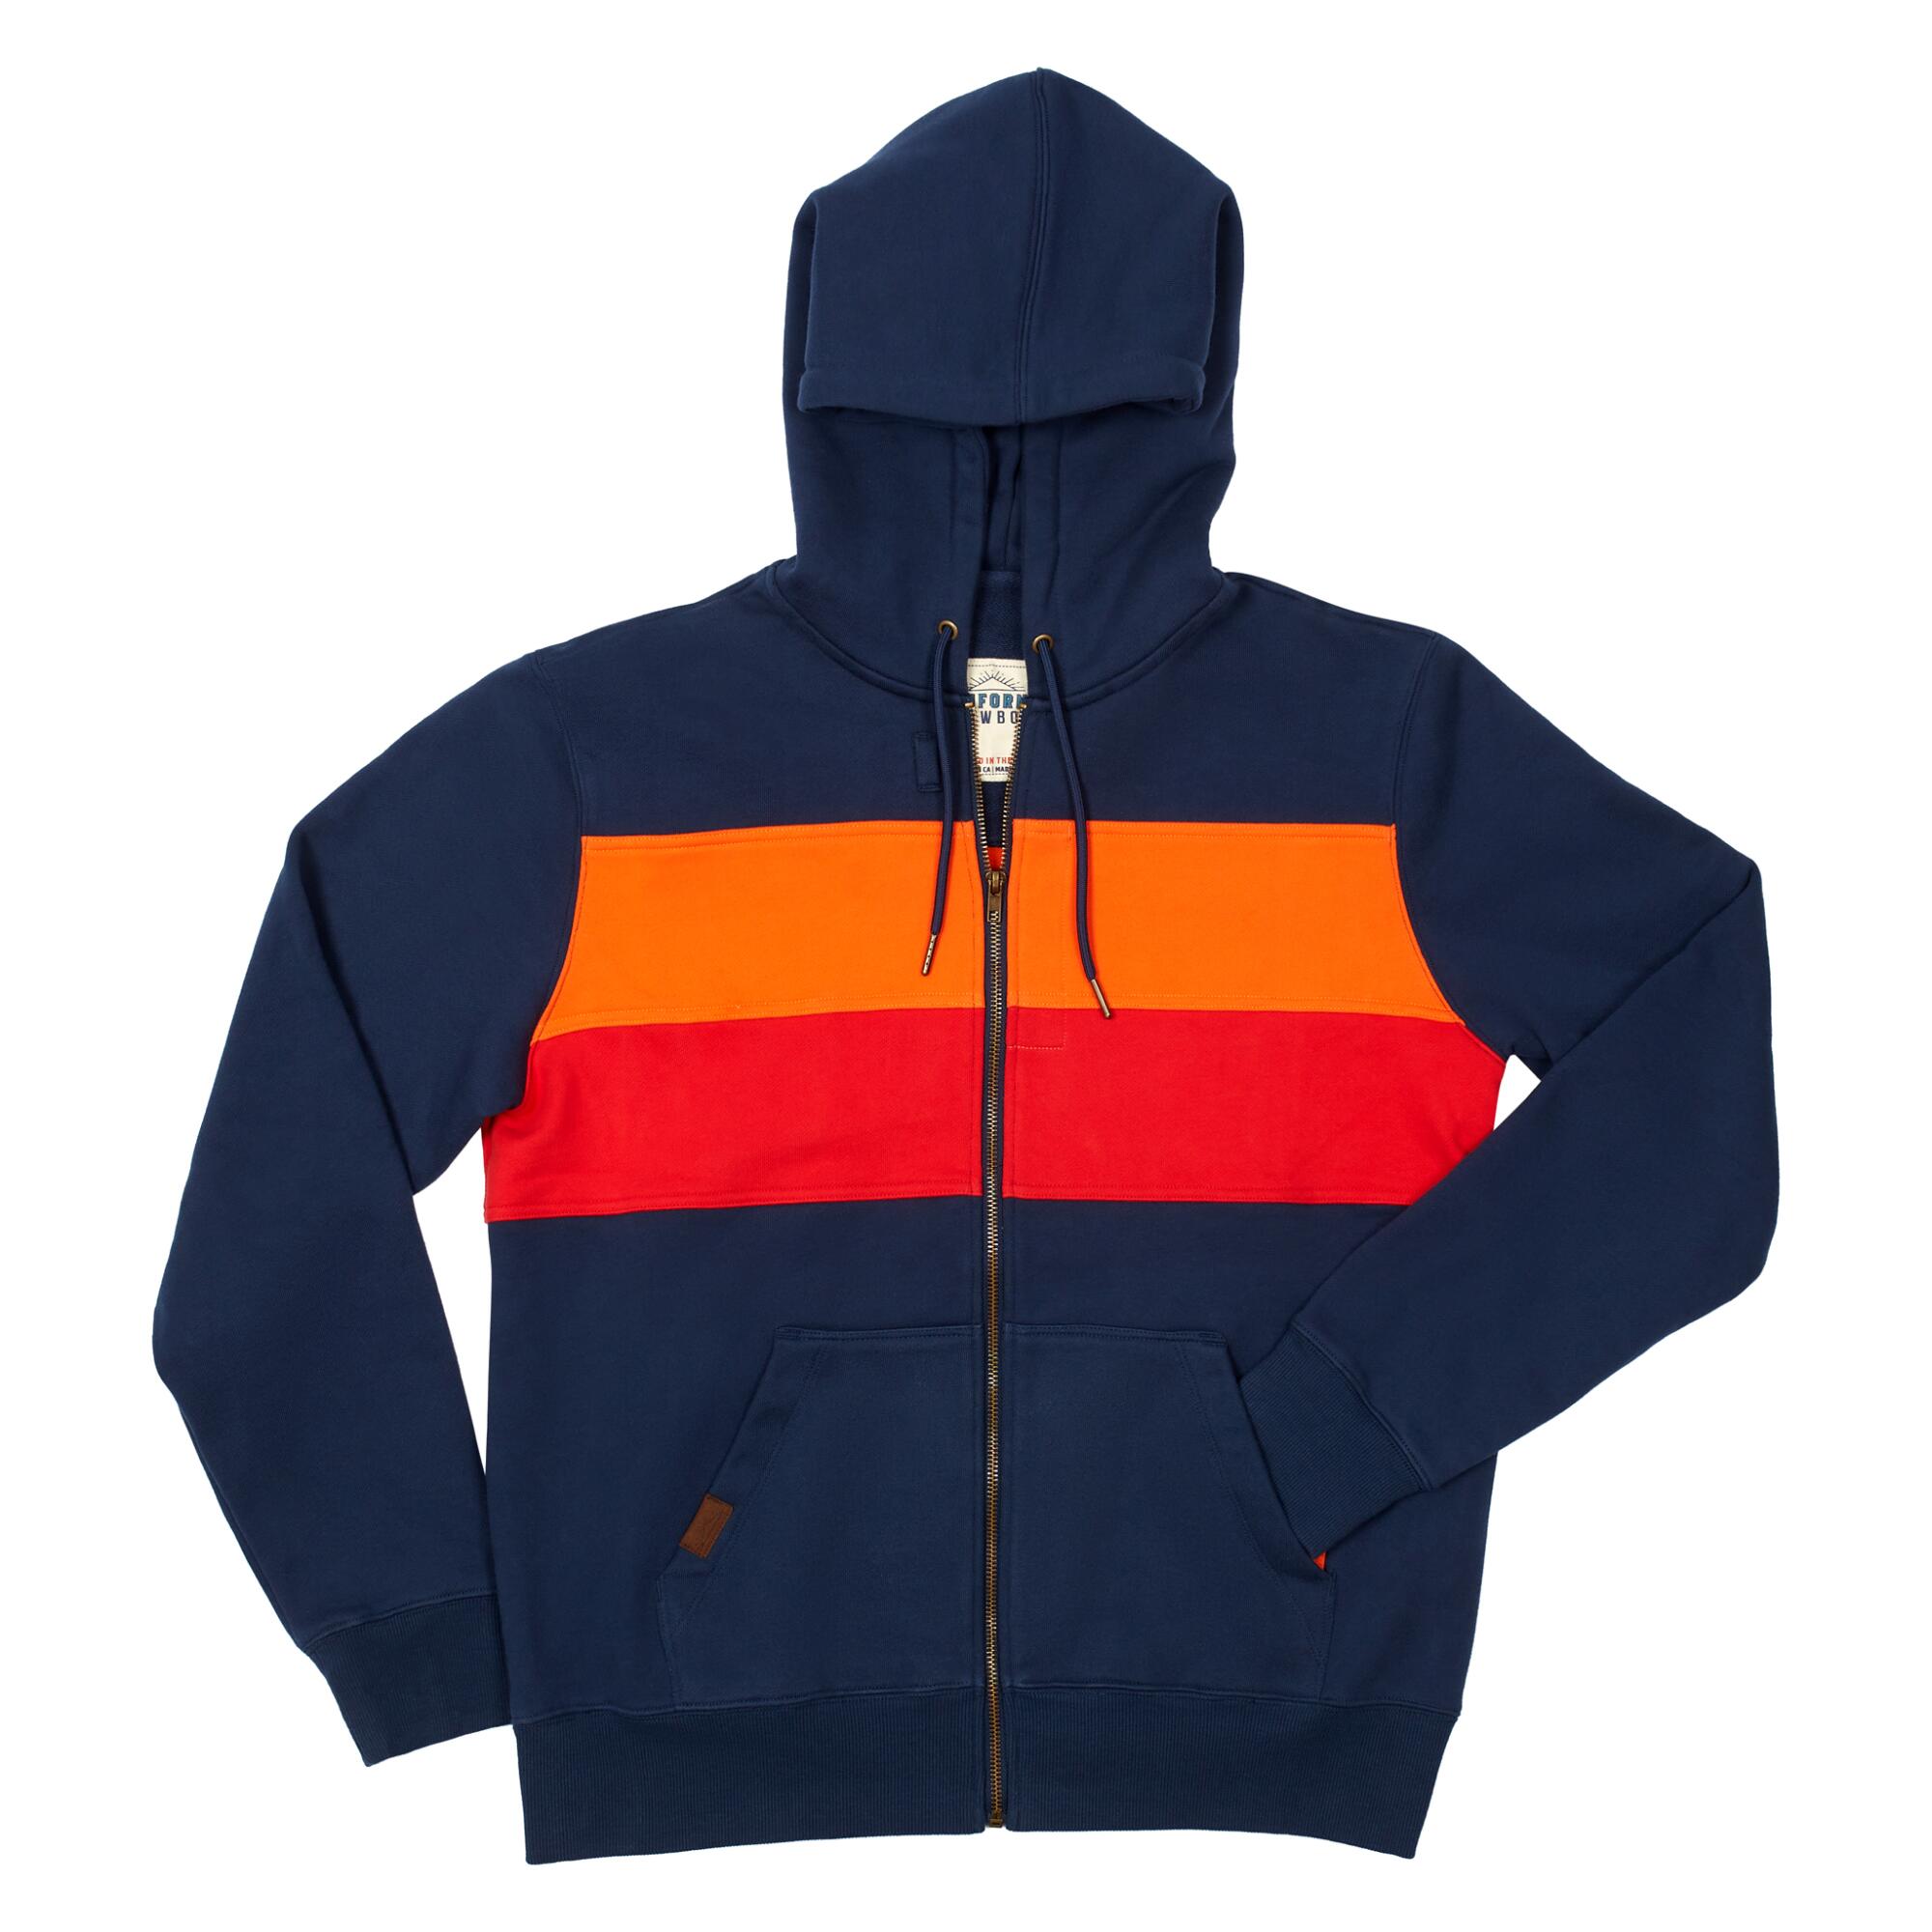 A hoodie with a red and orange stripe.